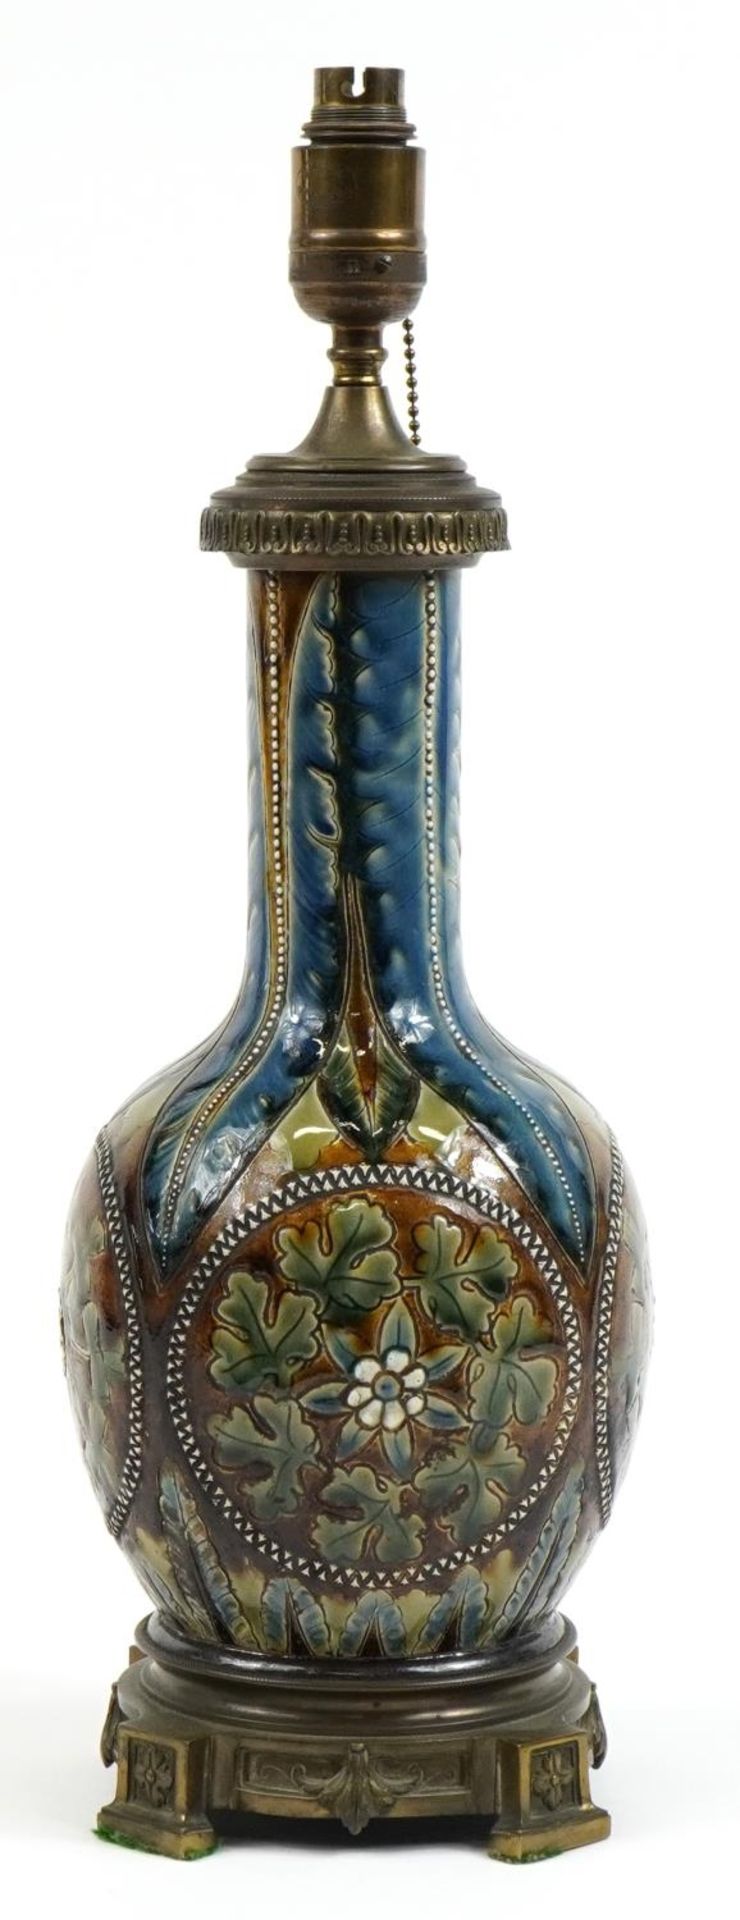 Manner of Royal Doulton, Art Nouveau stoneware vase table lamp with bronzed mounts incised with